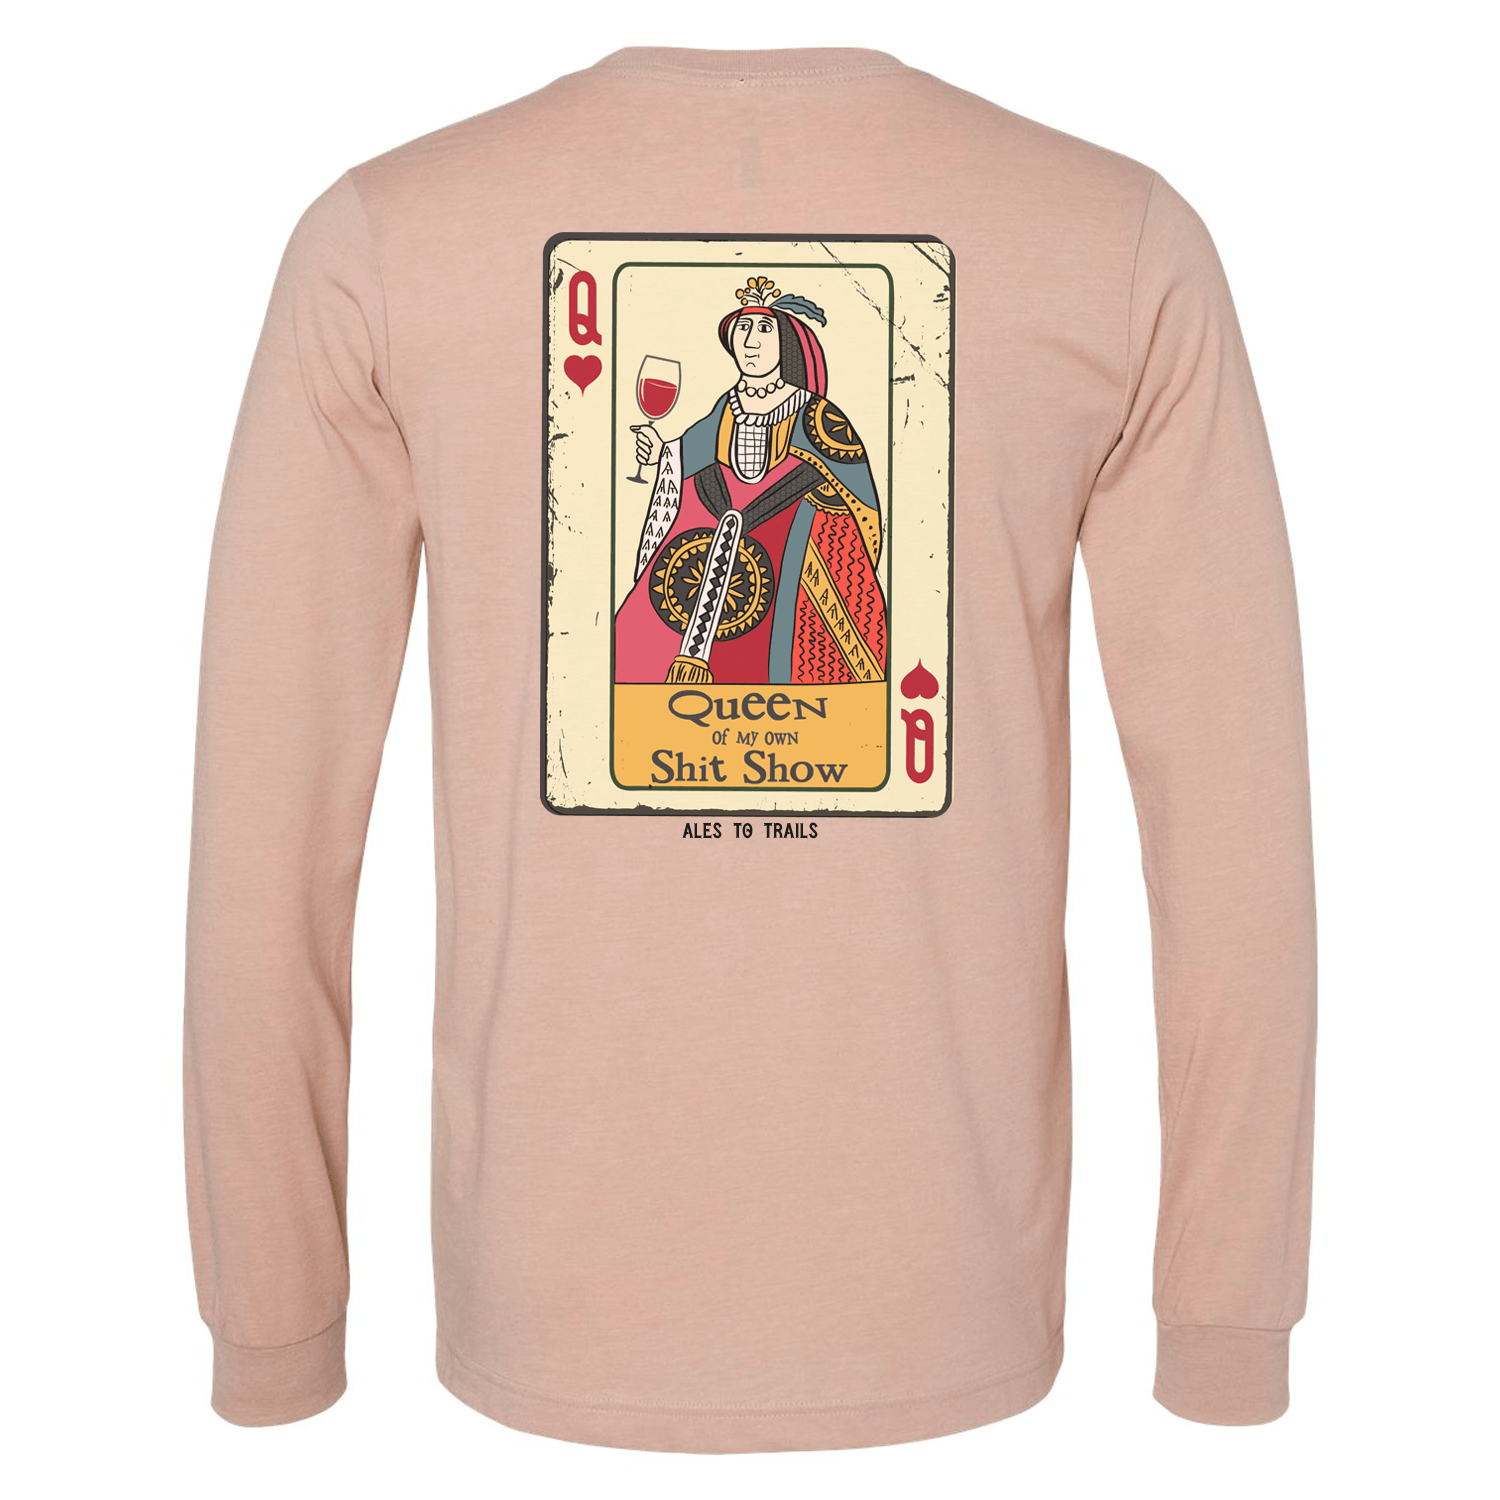 Queen of My own Sh** Show Long Sleeve - Ales to Trails